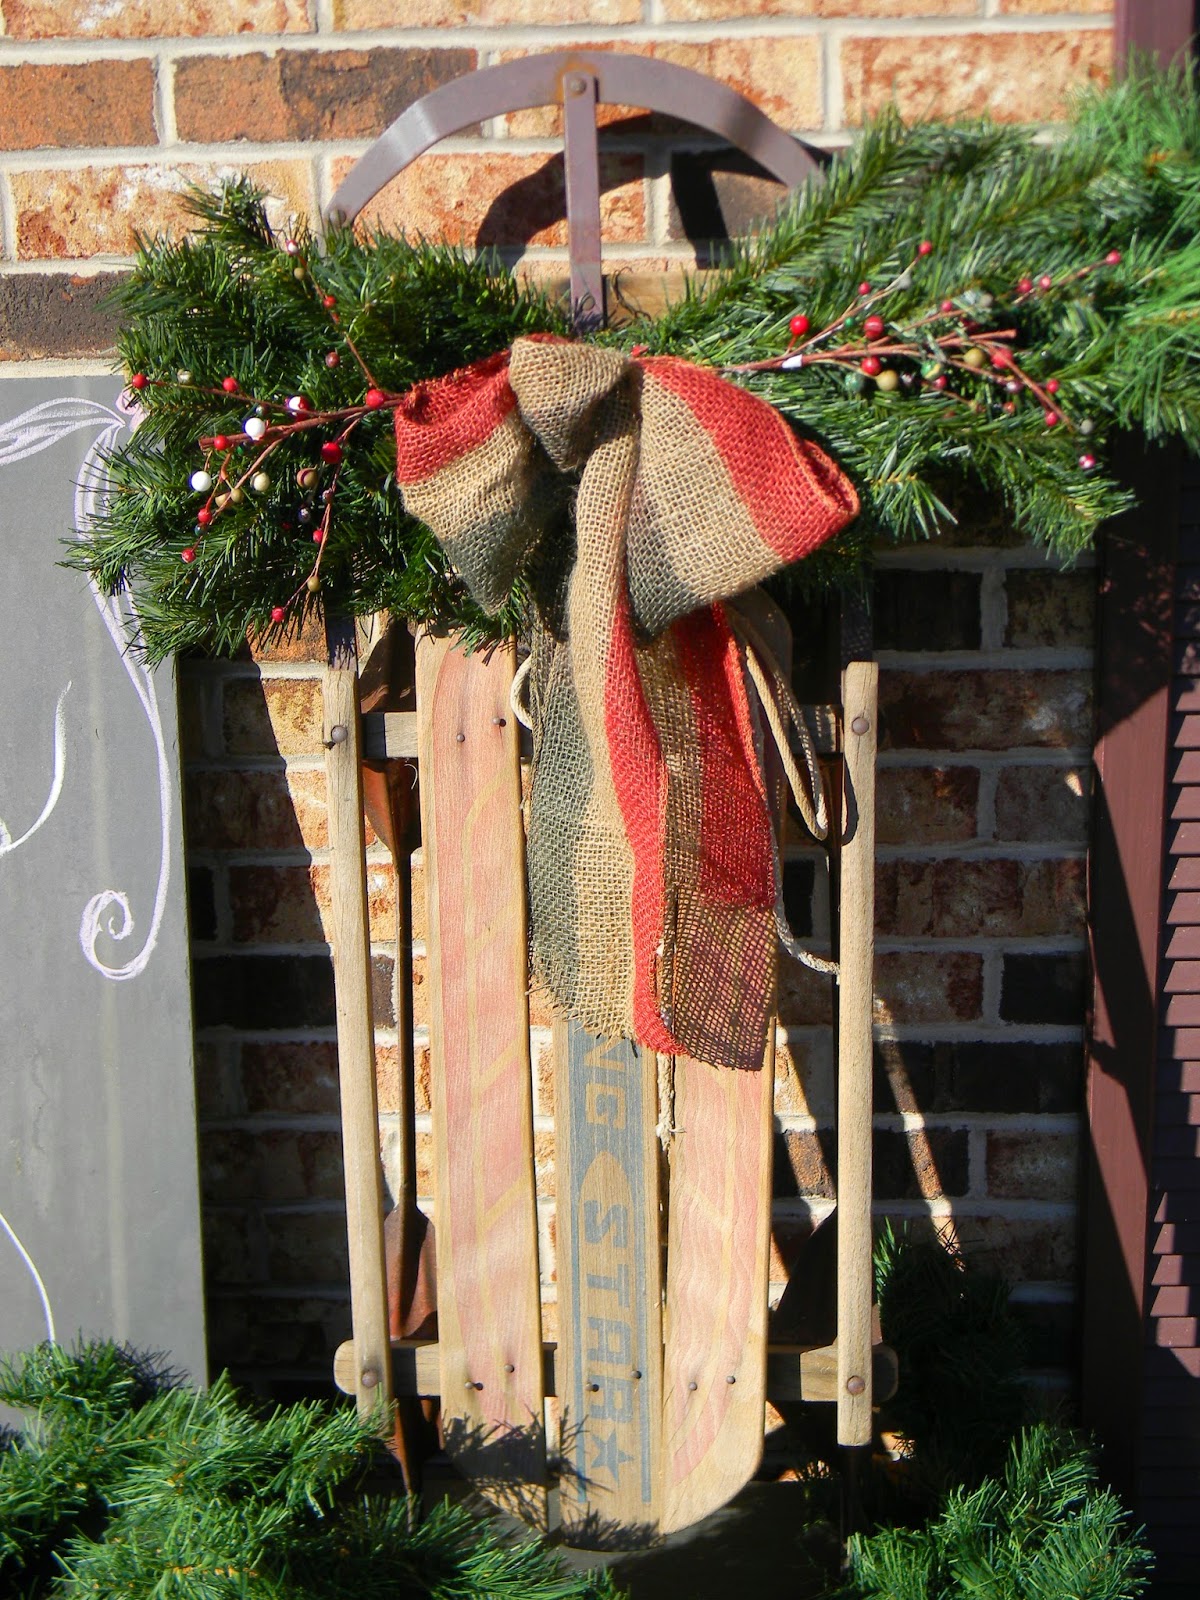 Artistic Endeavors 101: Outside Christmas in the Country